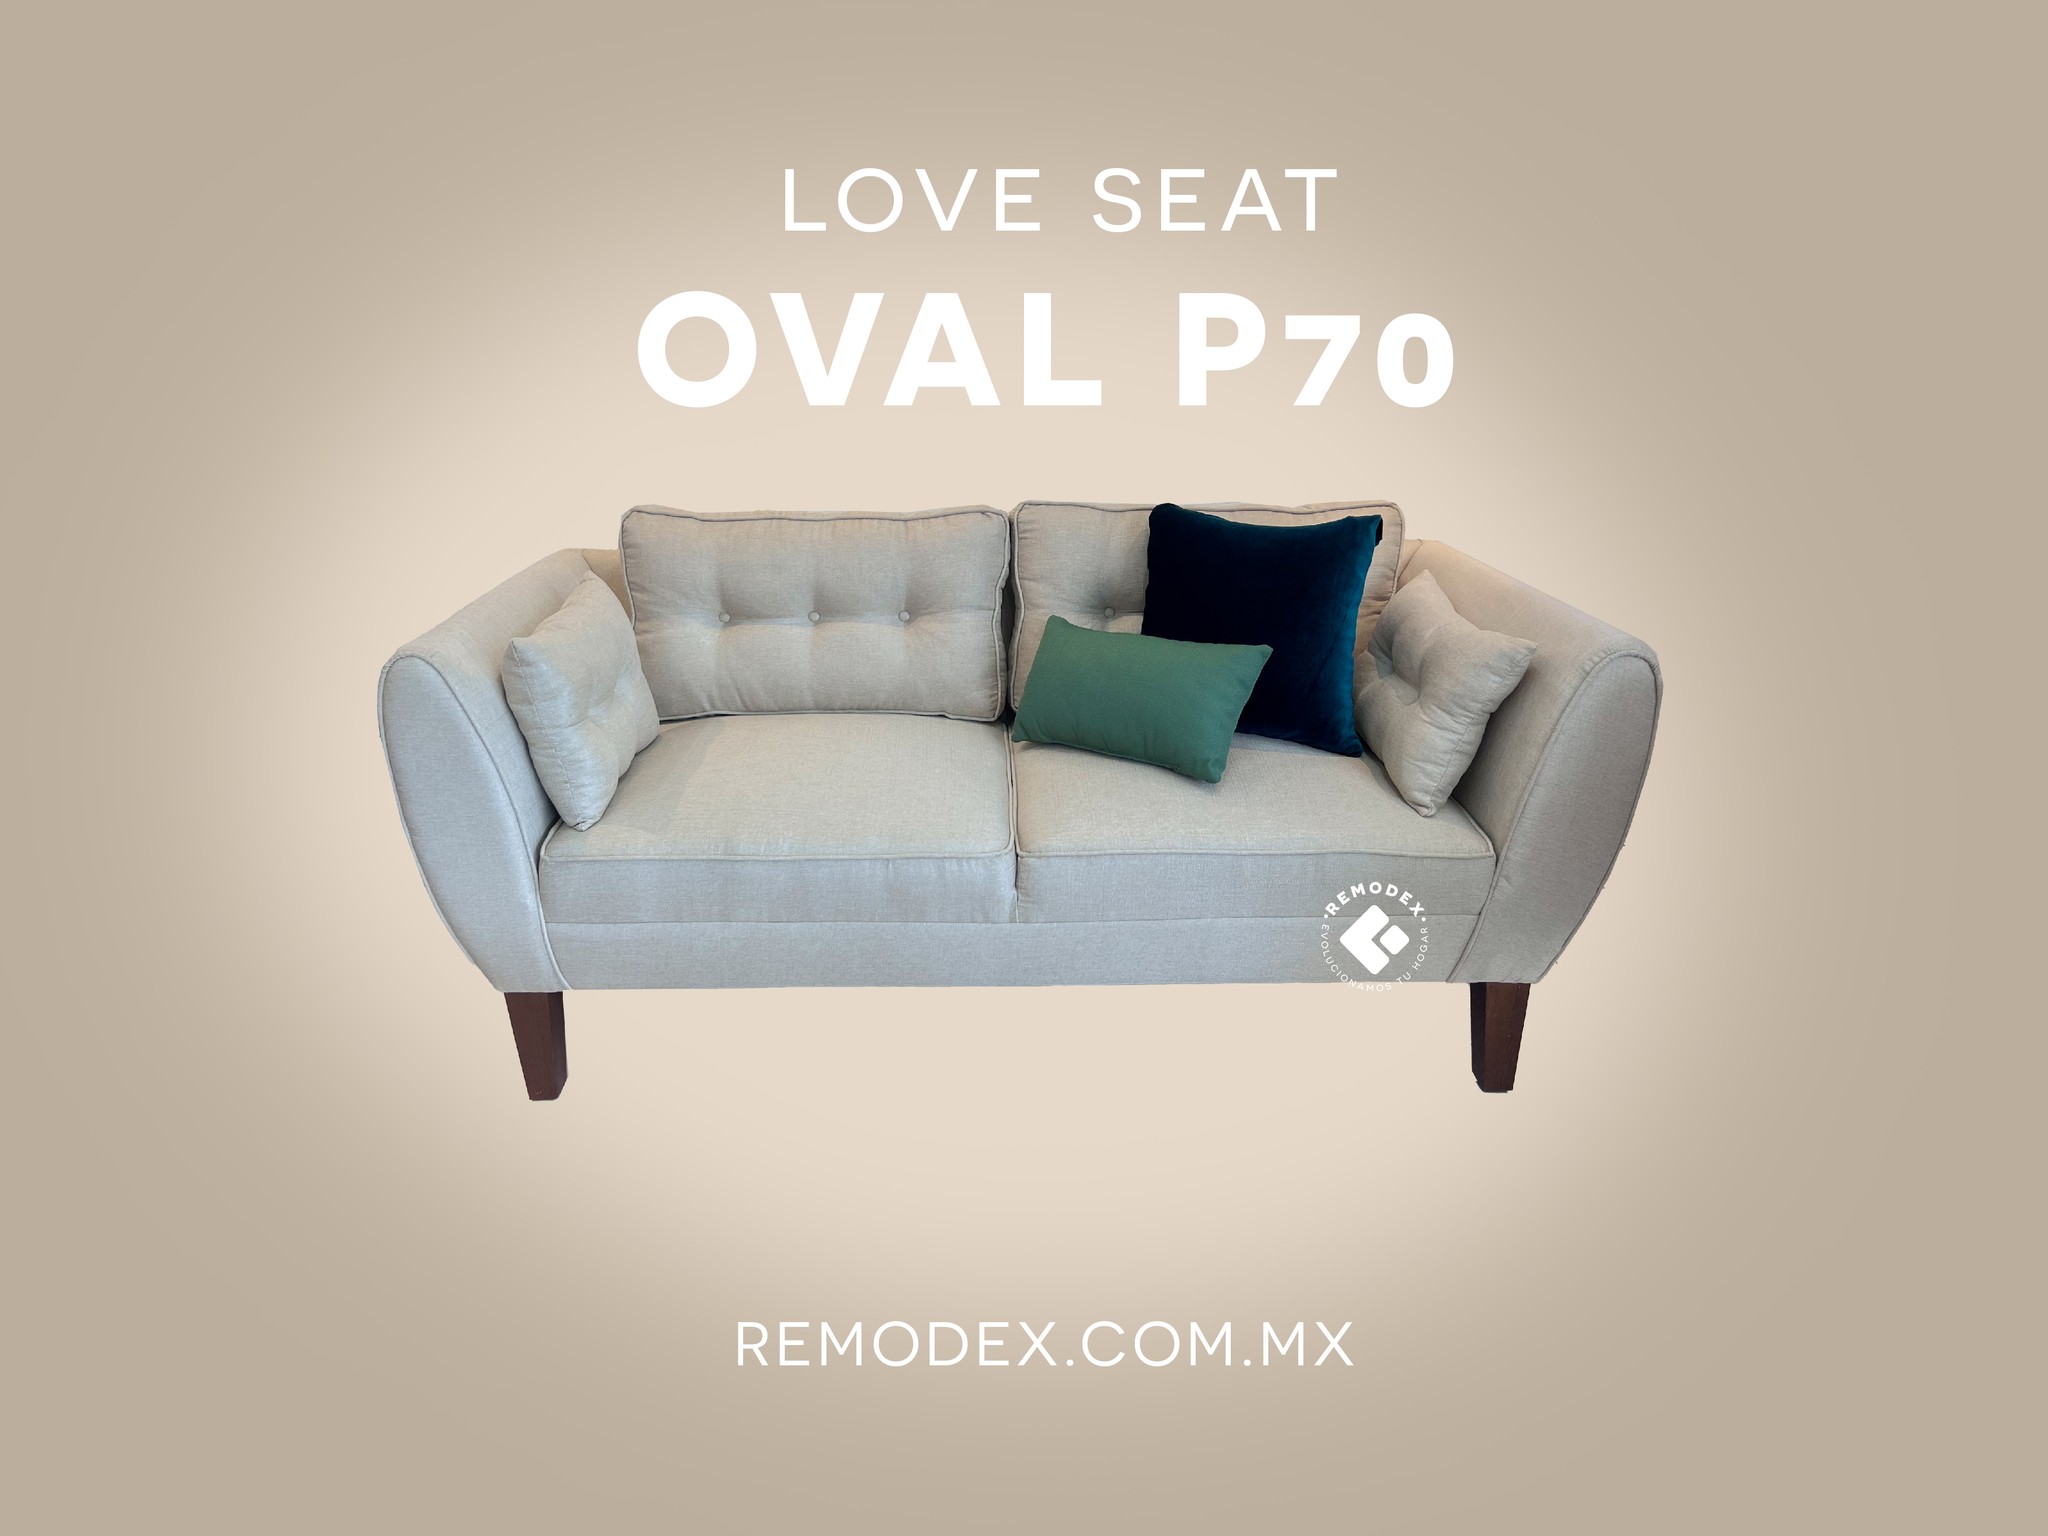 LOVE SEAT OVAL P70